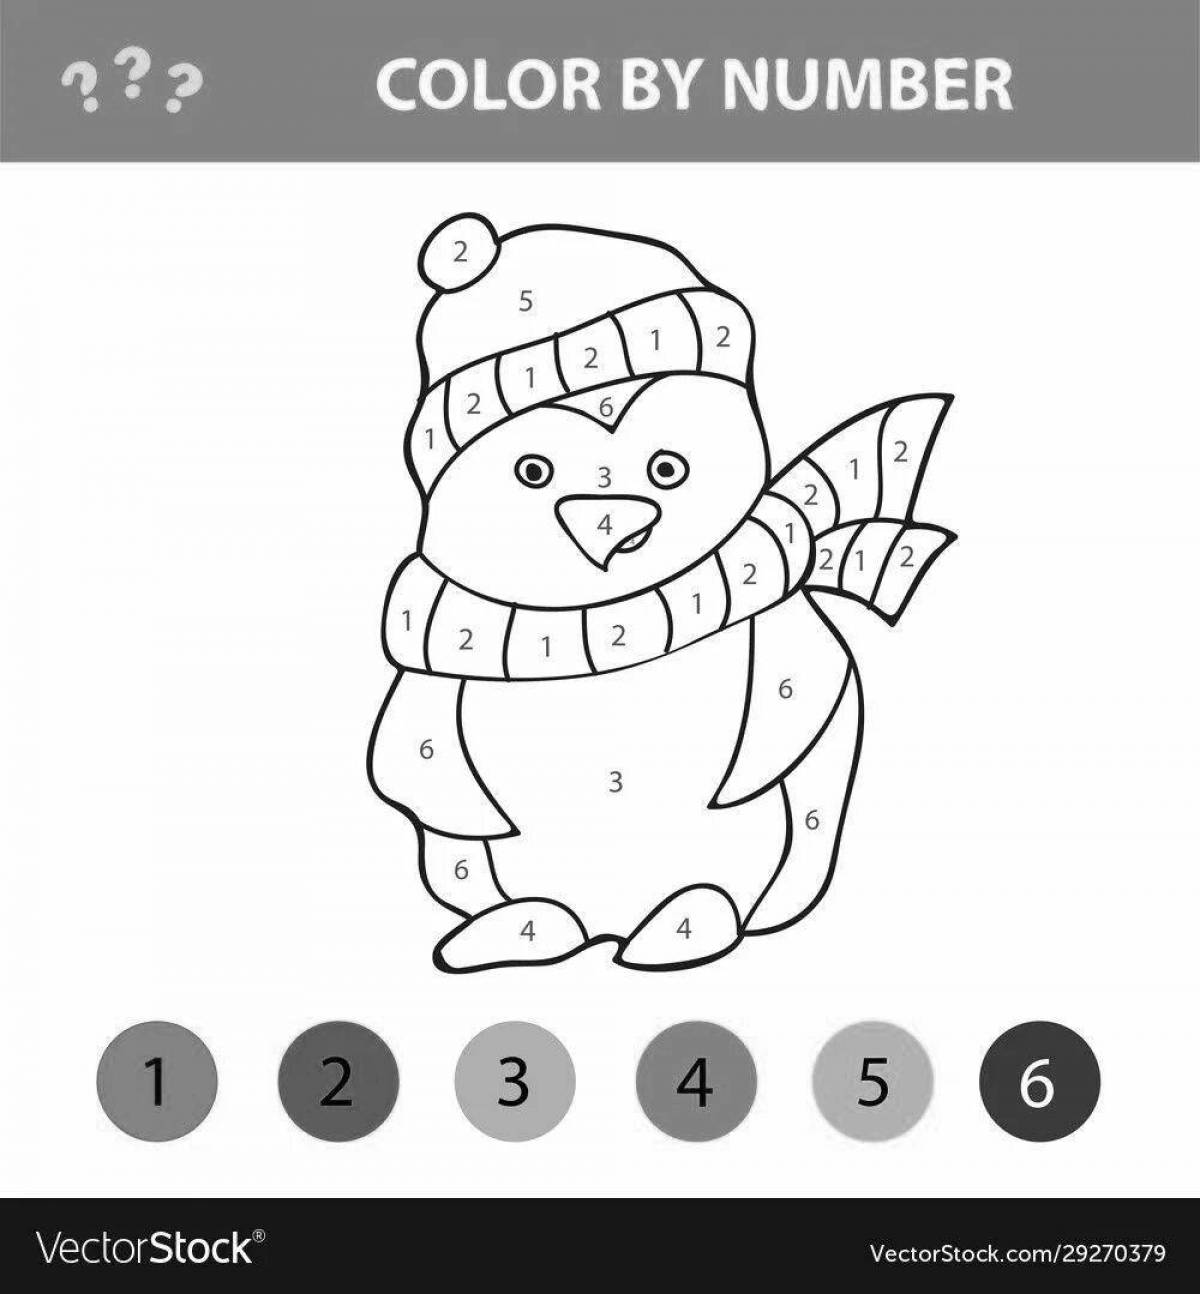 Cute penguin by number coloring book